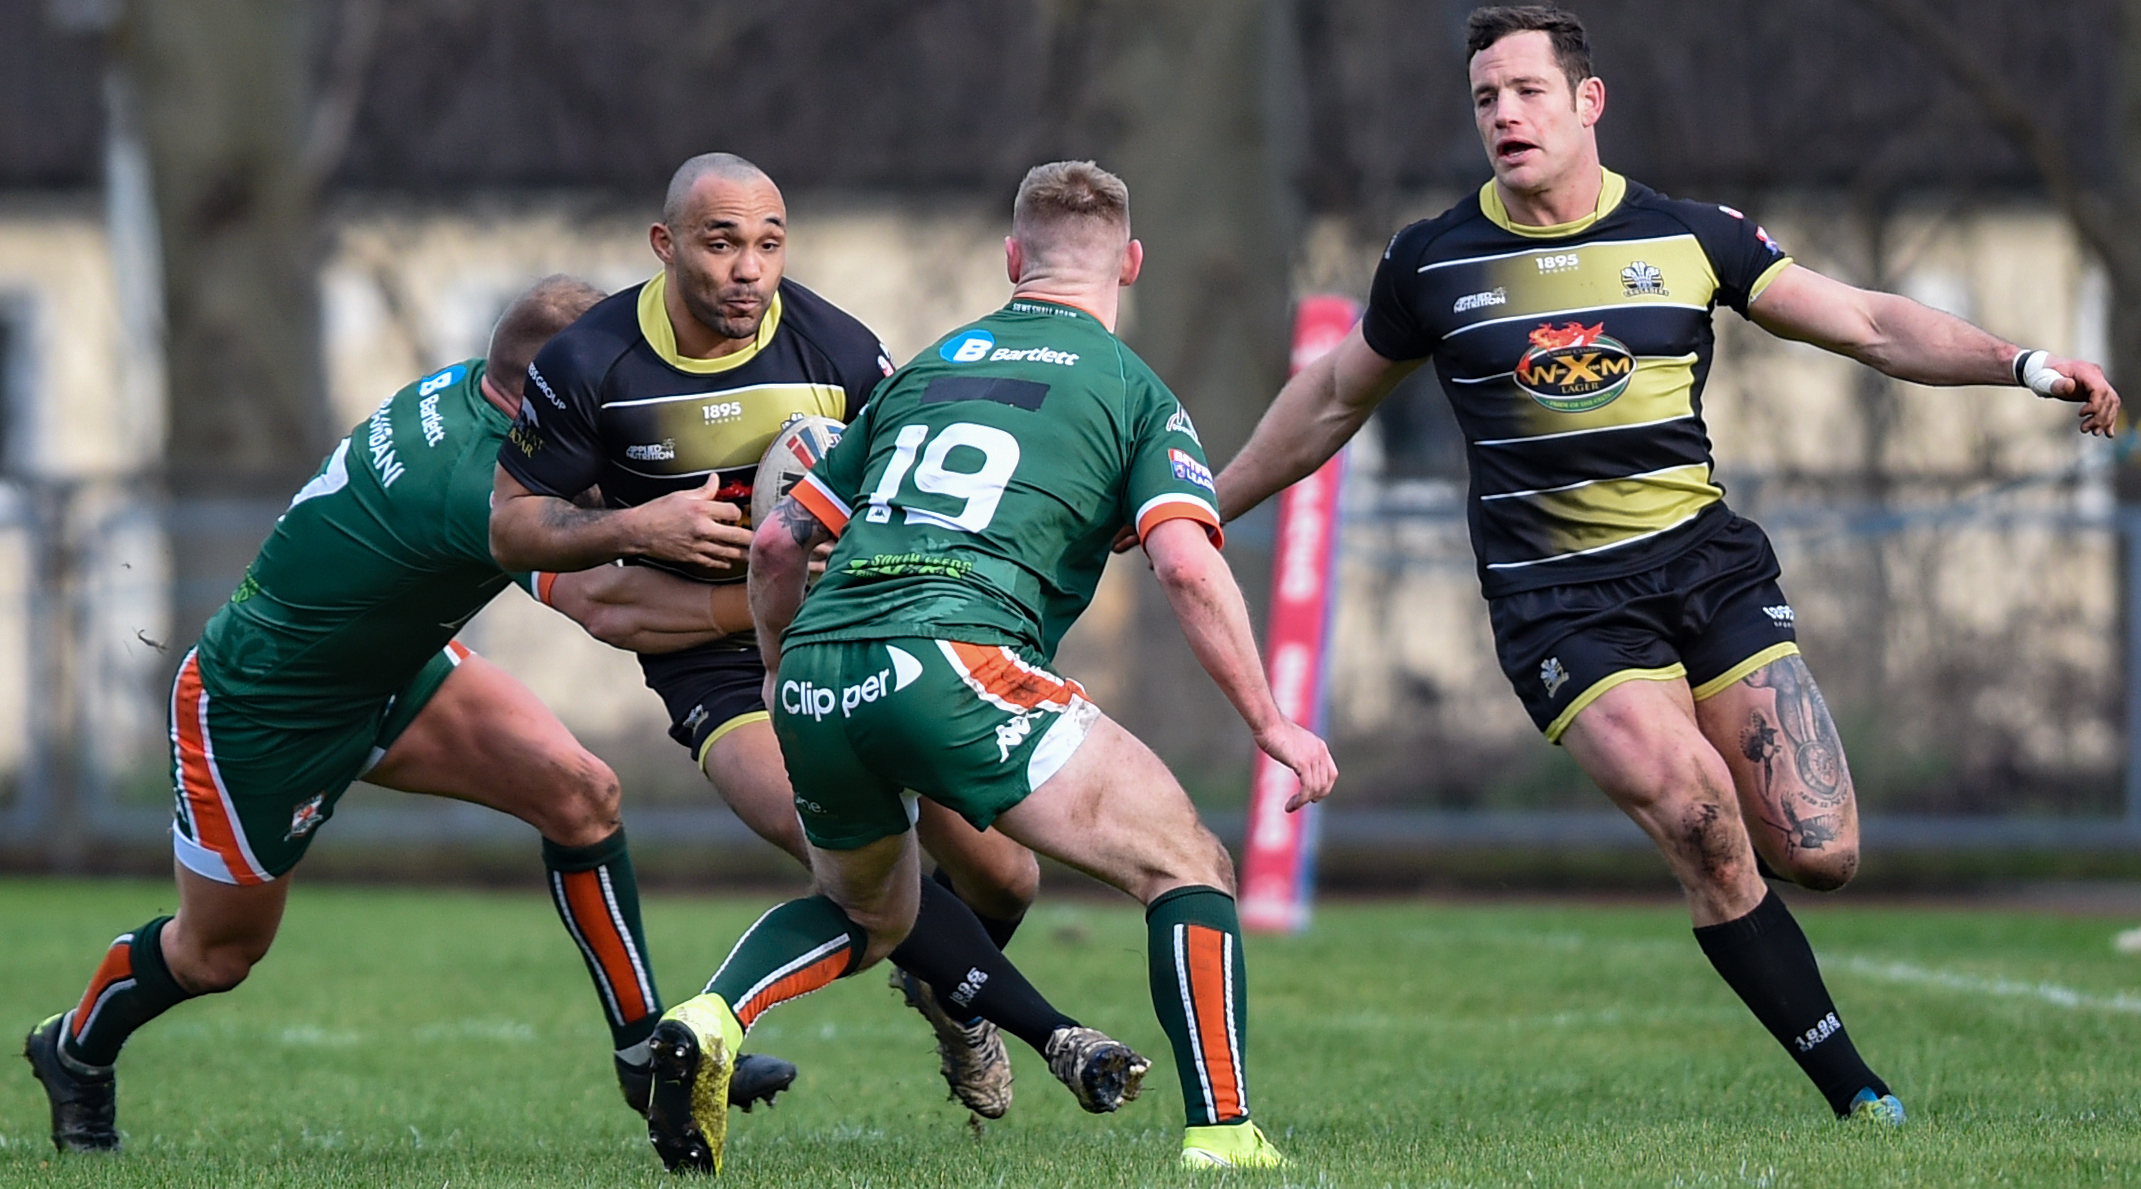 North Wales Crusaders seek revenge over Hunslet Hawks in top of the table League One clash The Leader pic